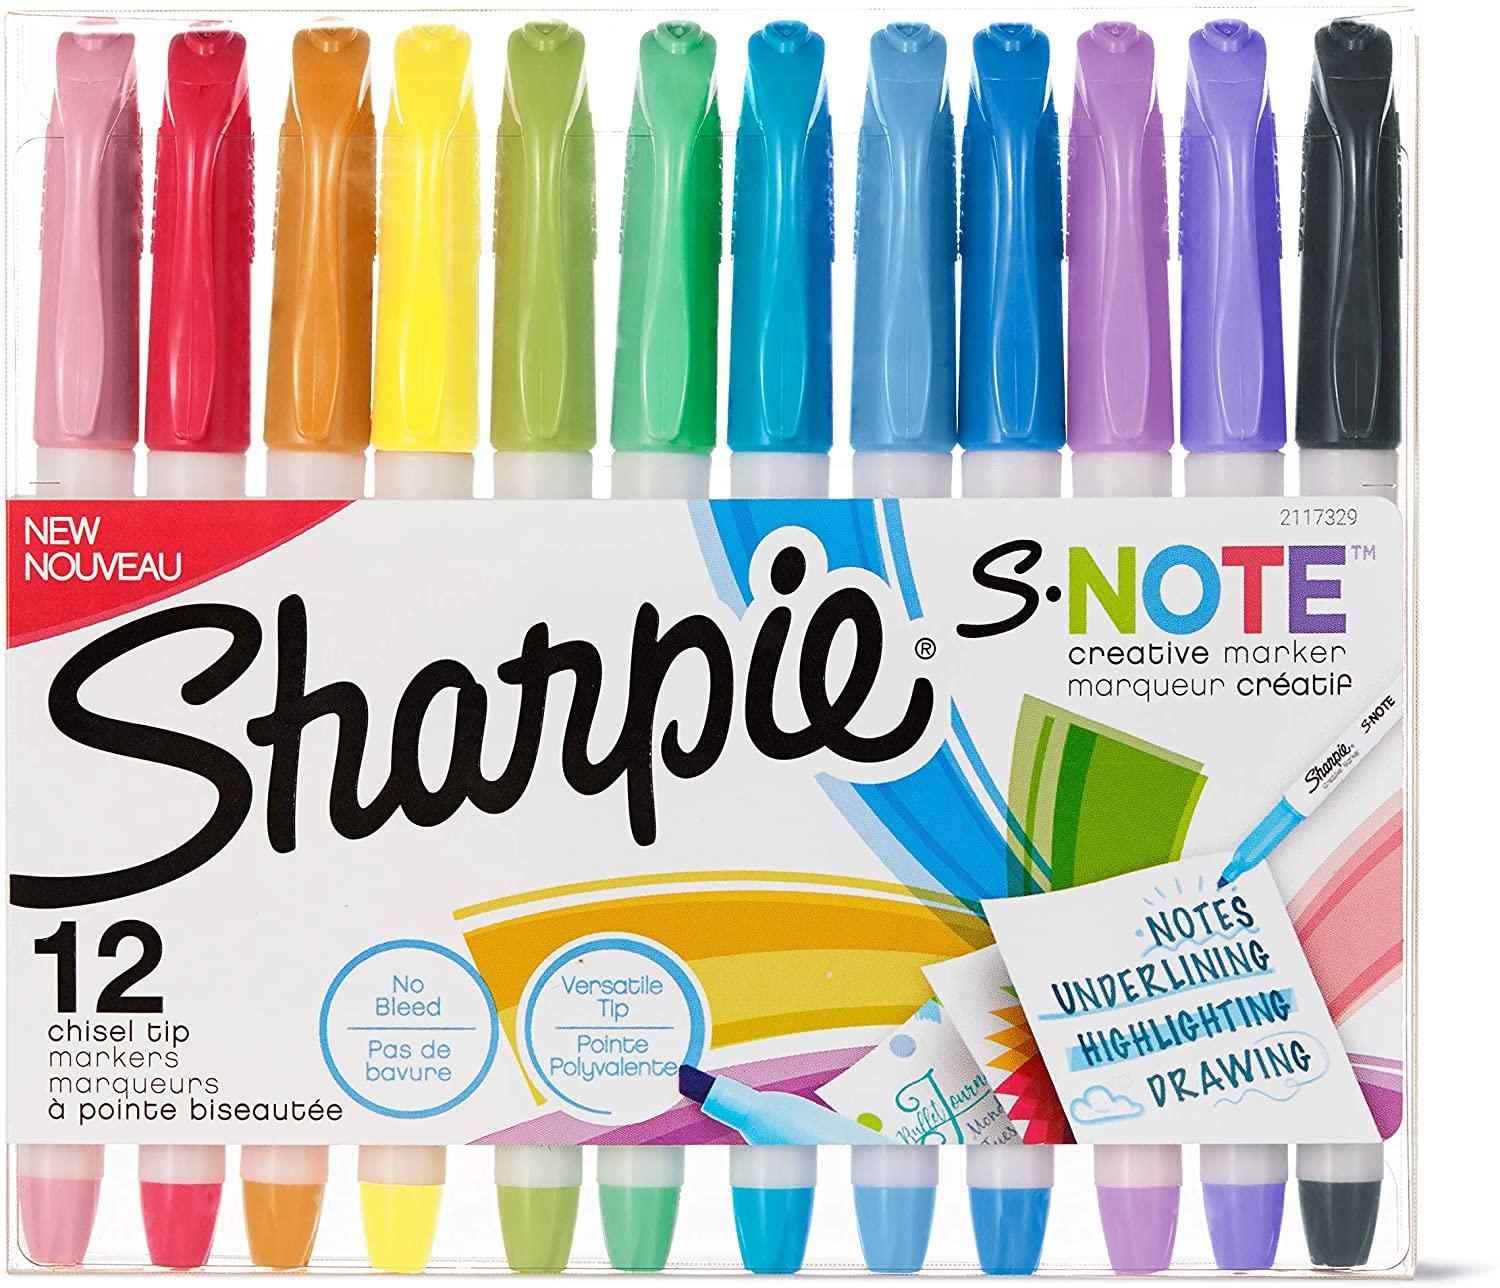 12 Sharpie S-Note Creative Markers for $5